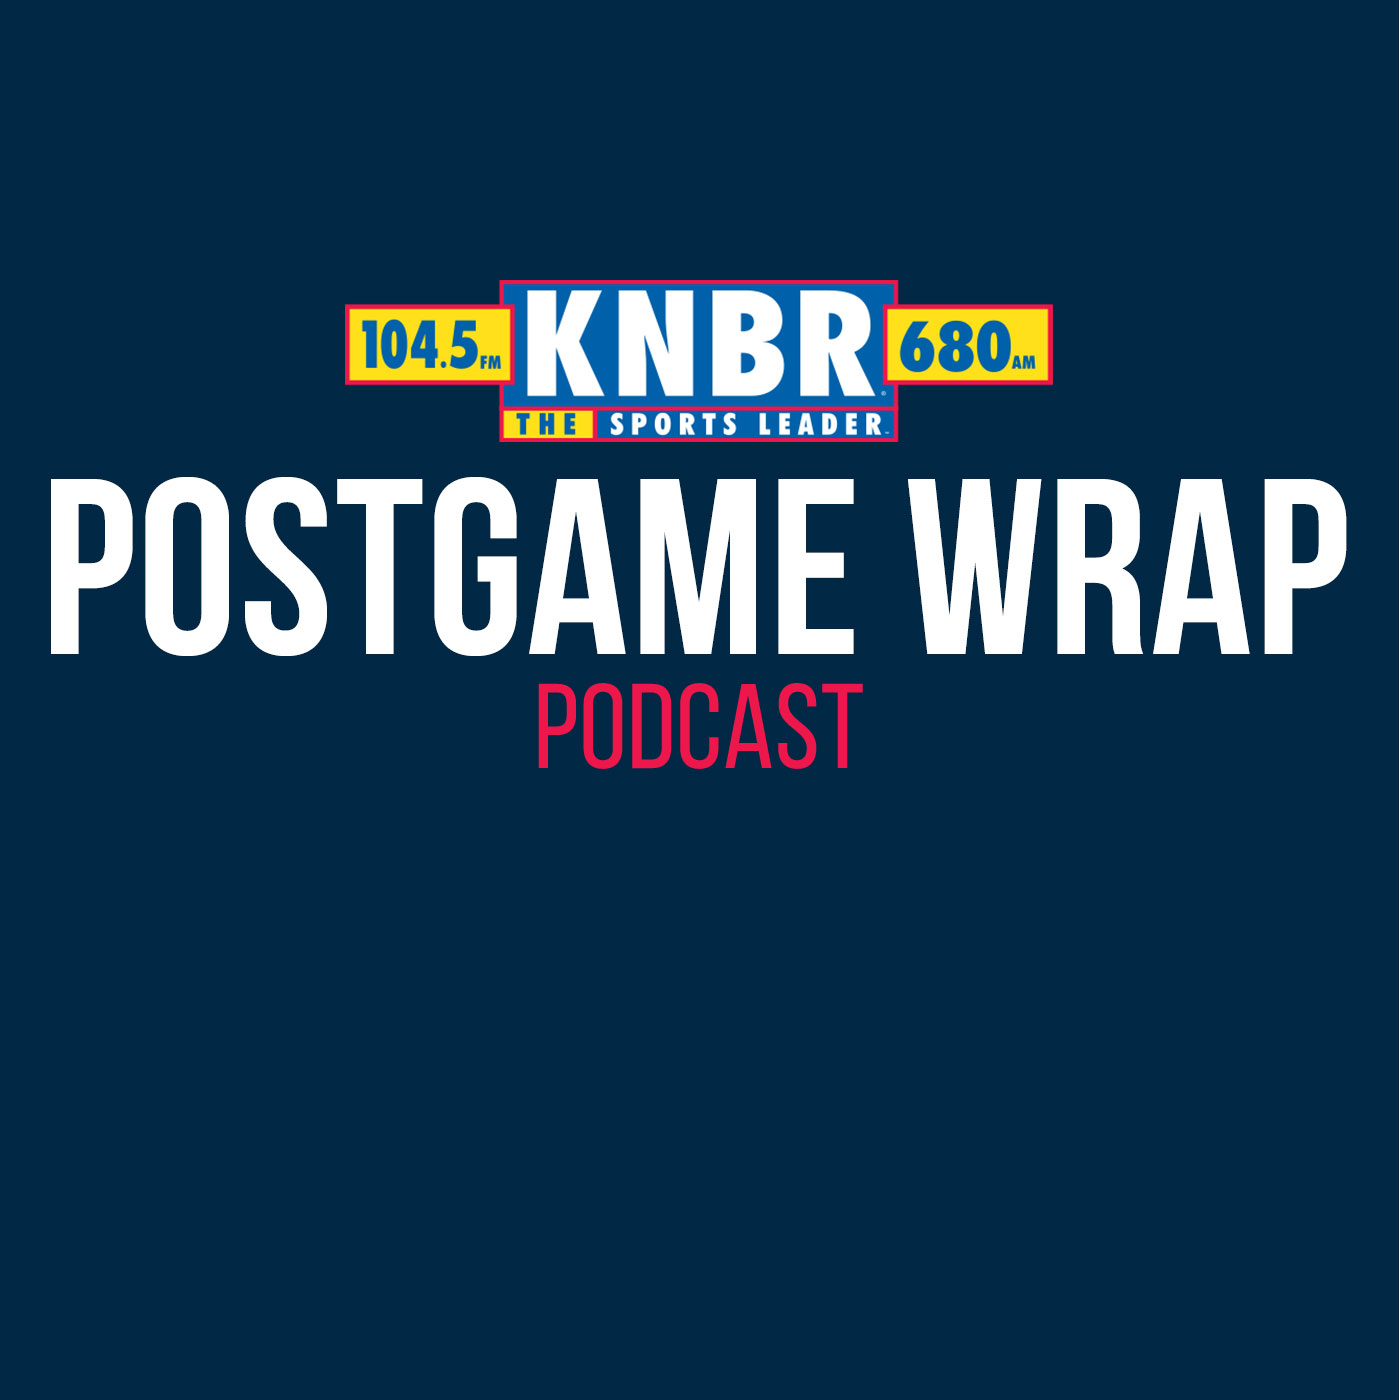 6-25 Postgame Wrap: Giants 9, Reds 2